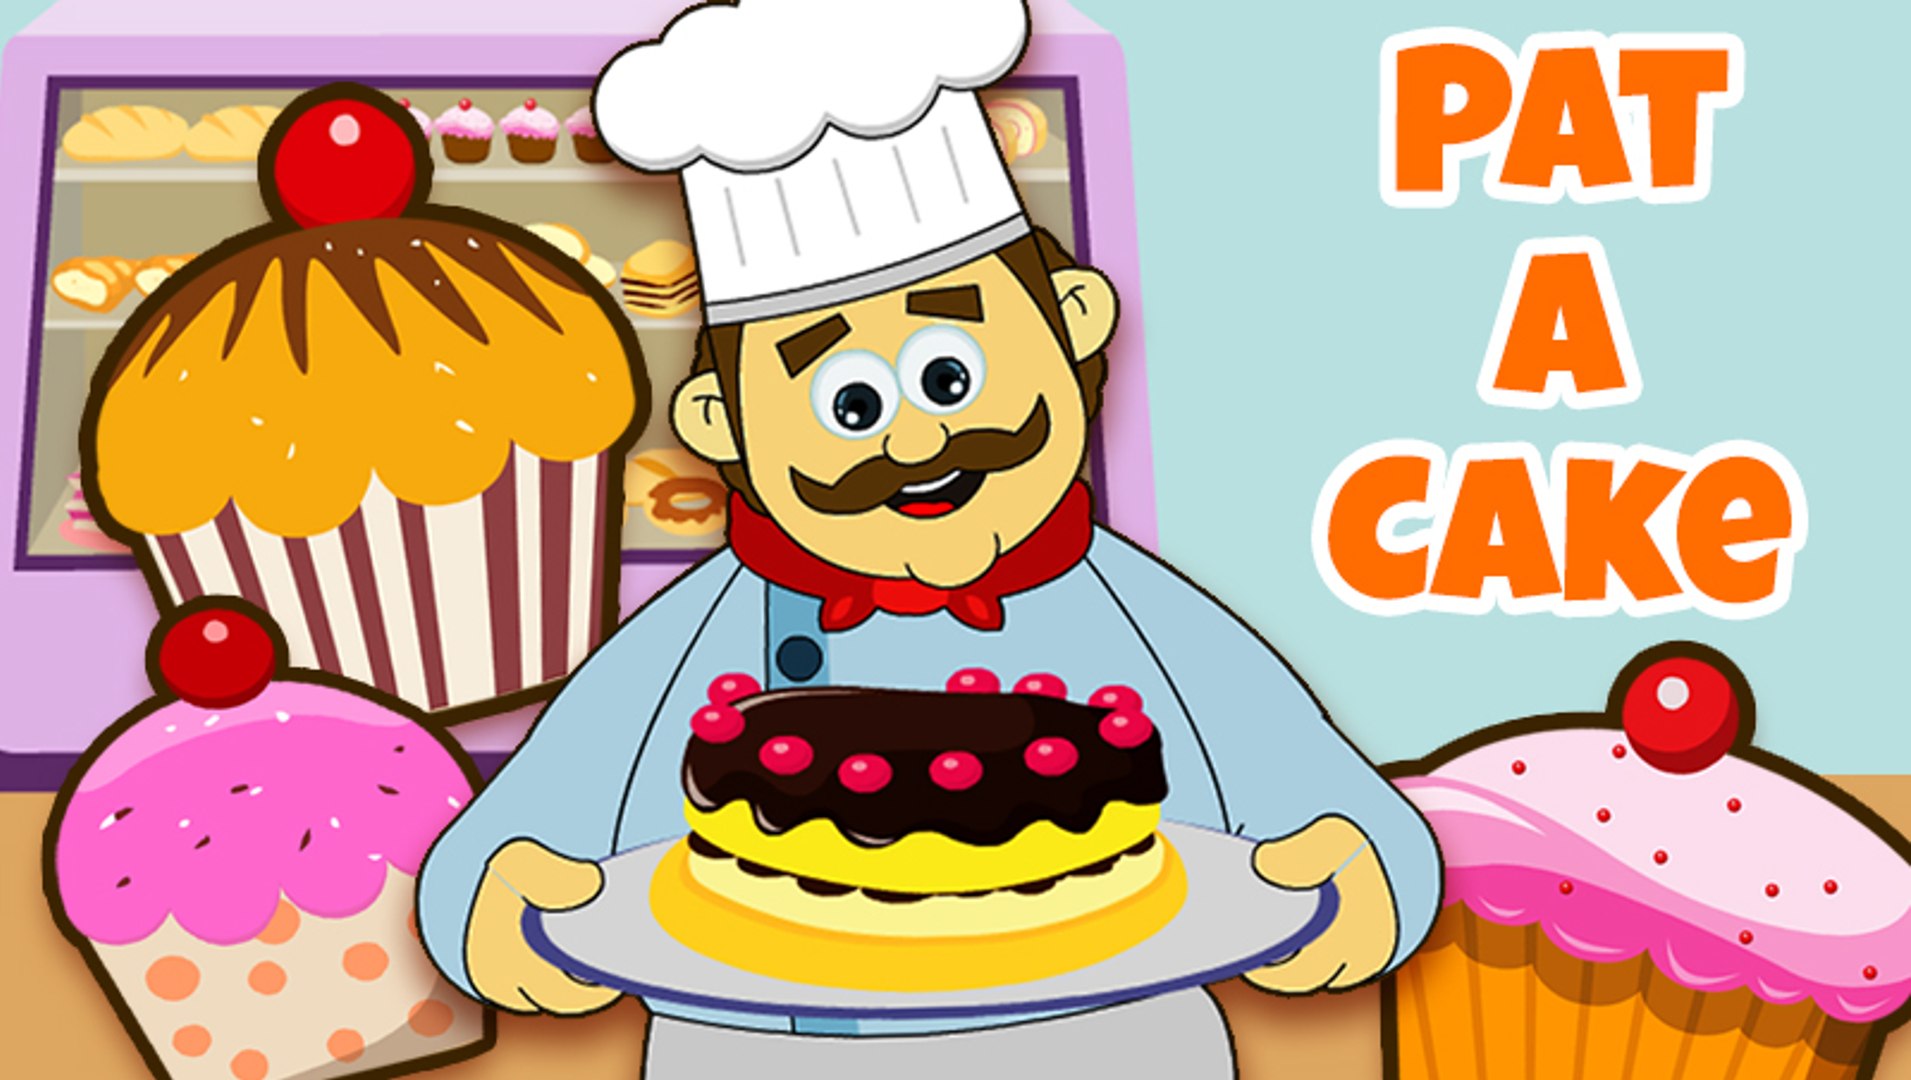 Pat A Cake - video Dailymotion